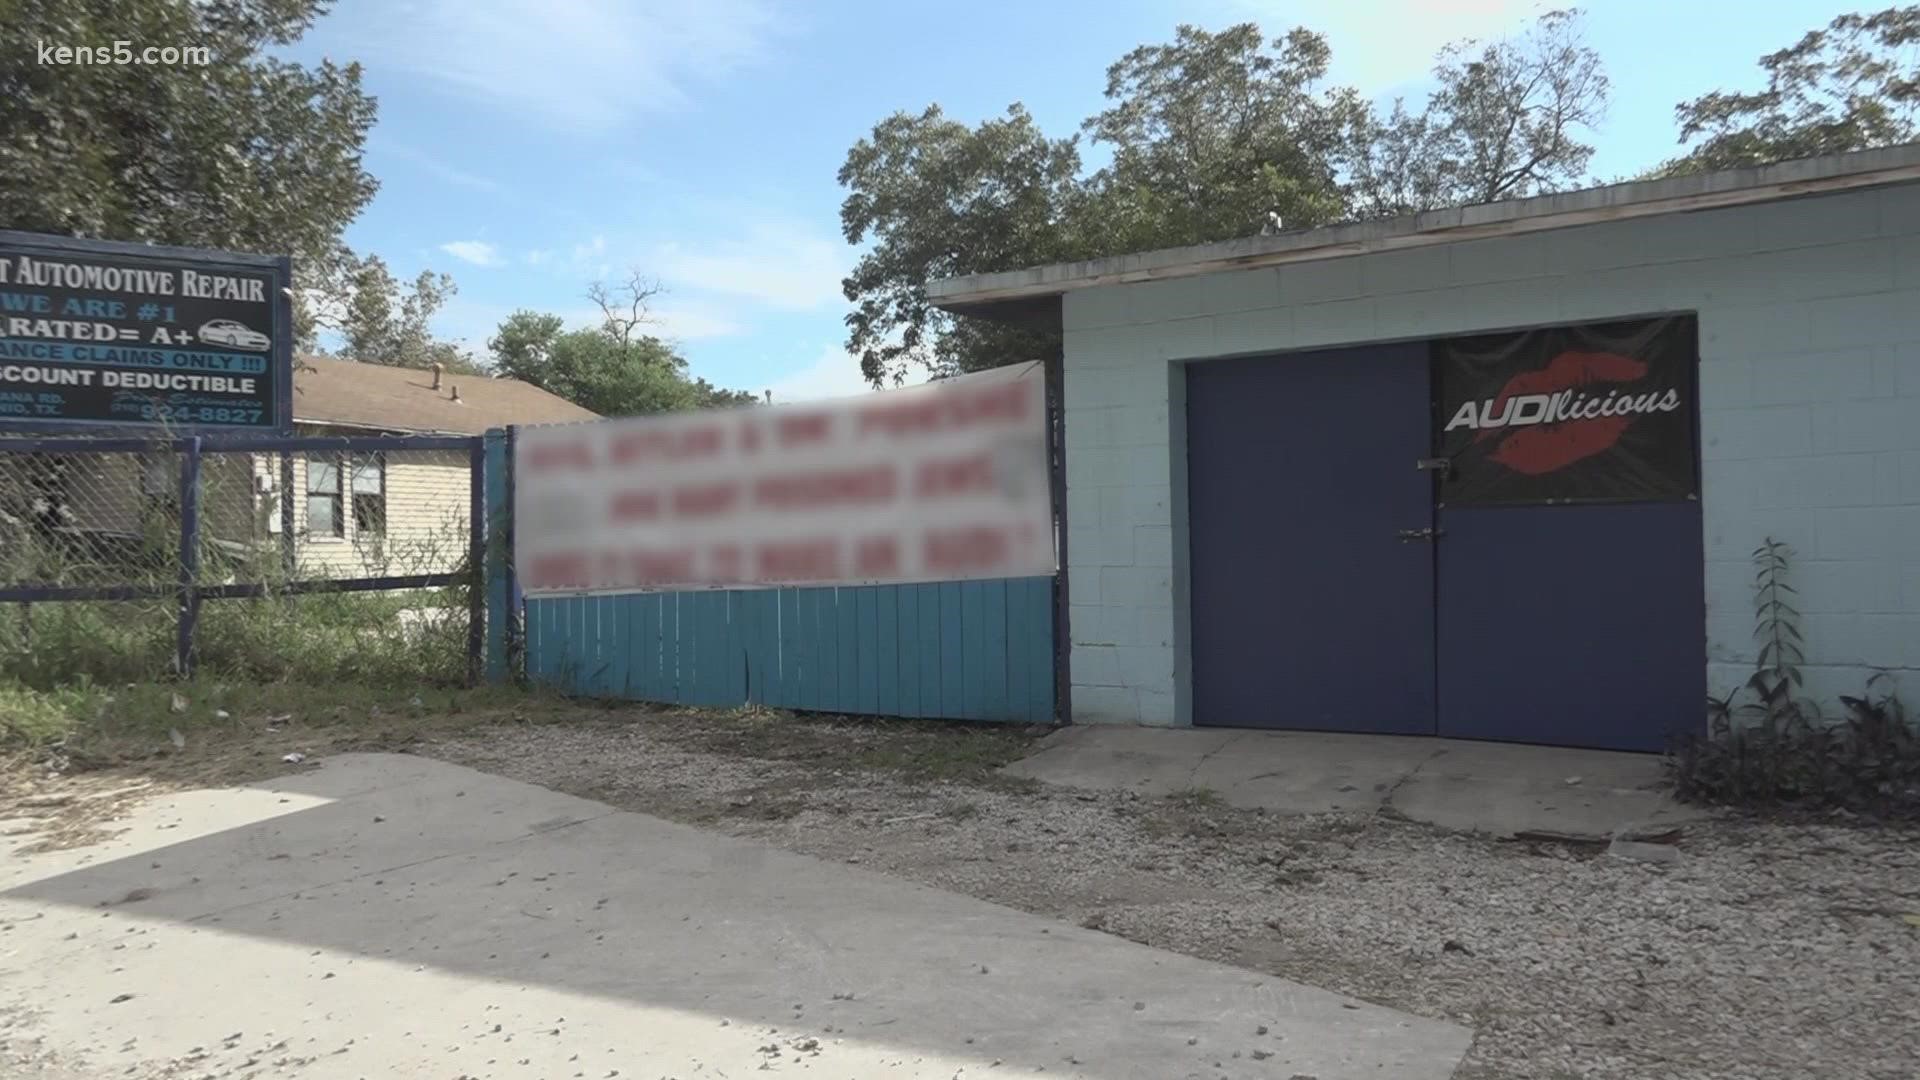 The auto repair shop's display of hate-filled rhetoric comes on the heels of last week's protests across the street from San Antonio's Jewish Community Center.